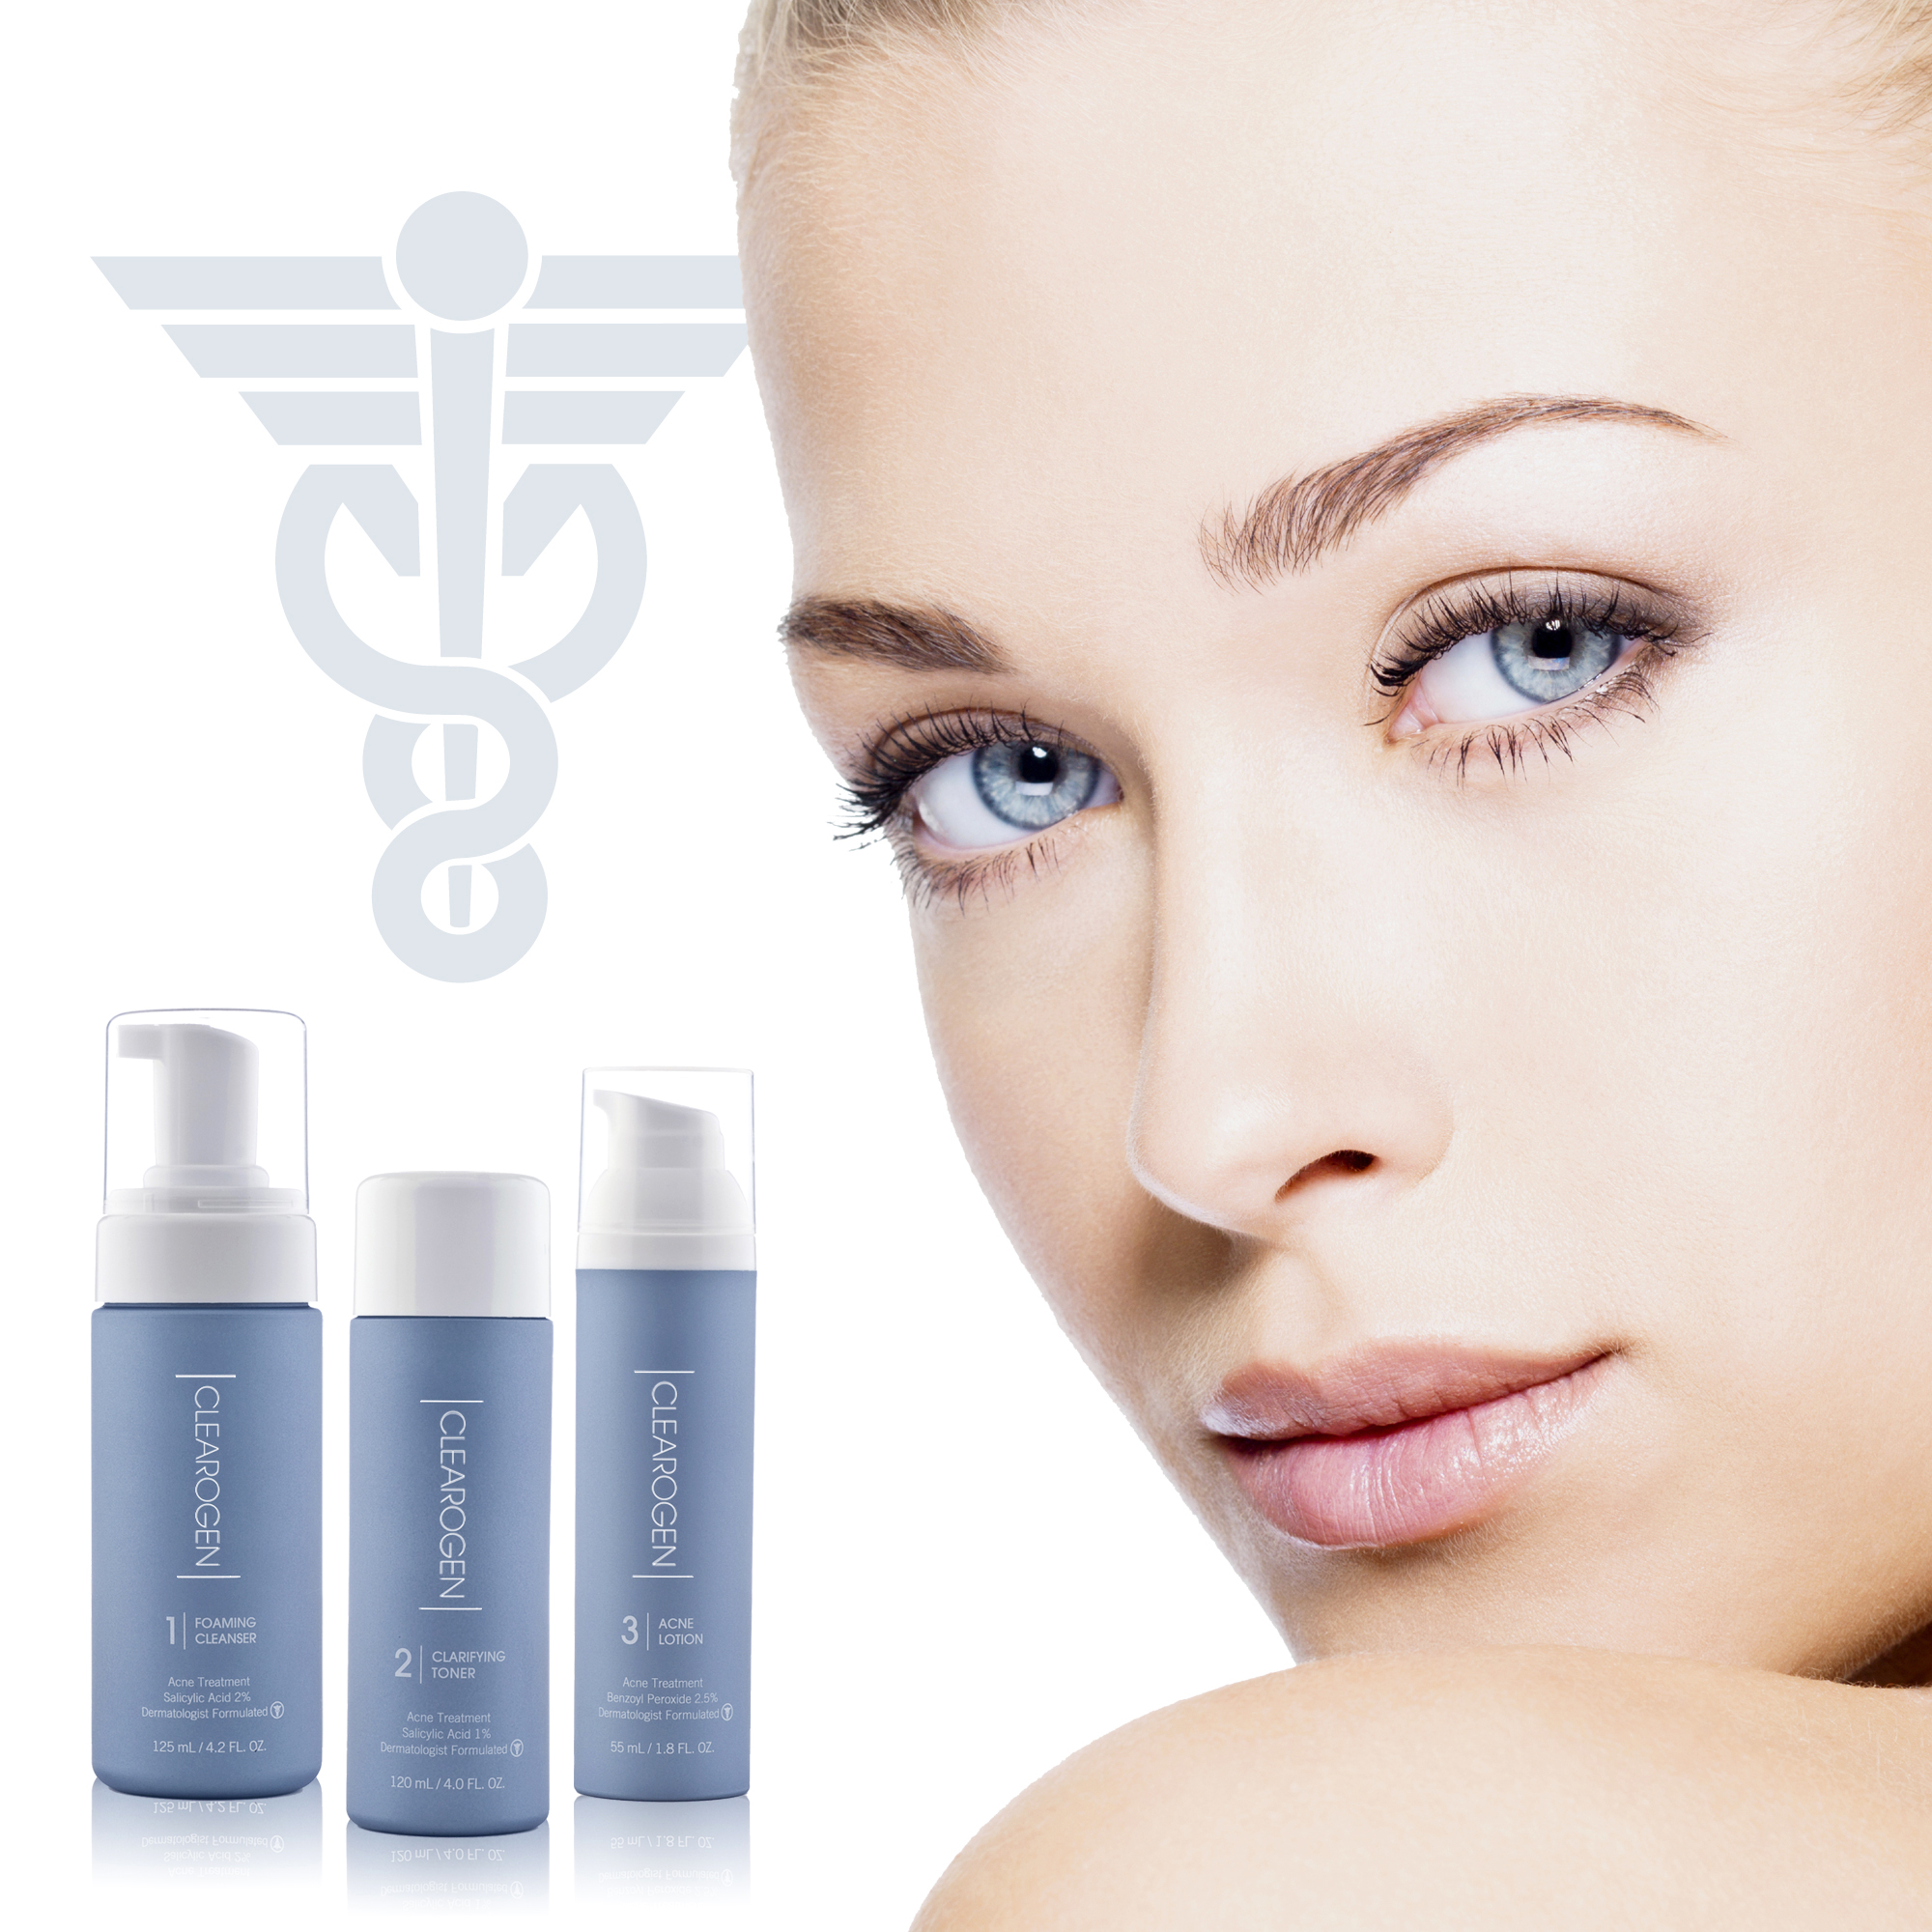 CLEAROGEN stops the acne cycle and clears the skin.